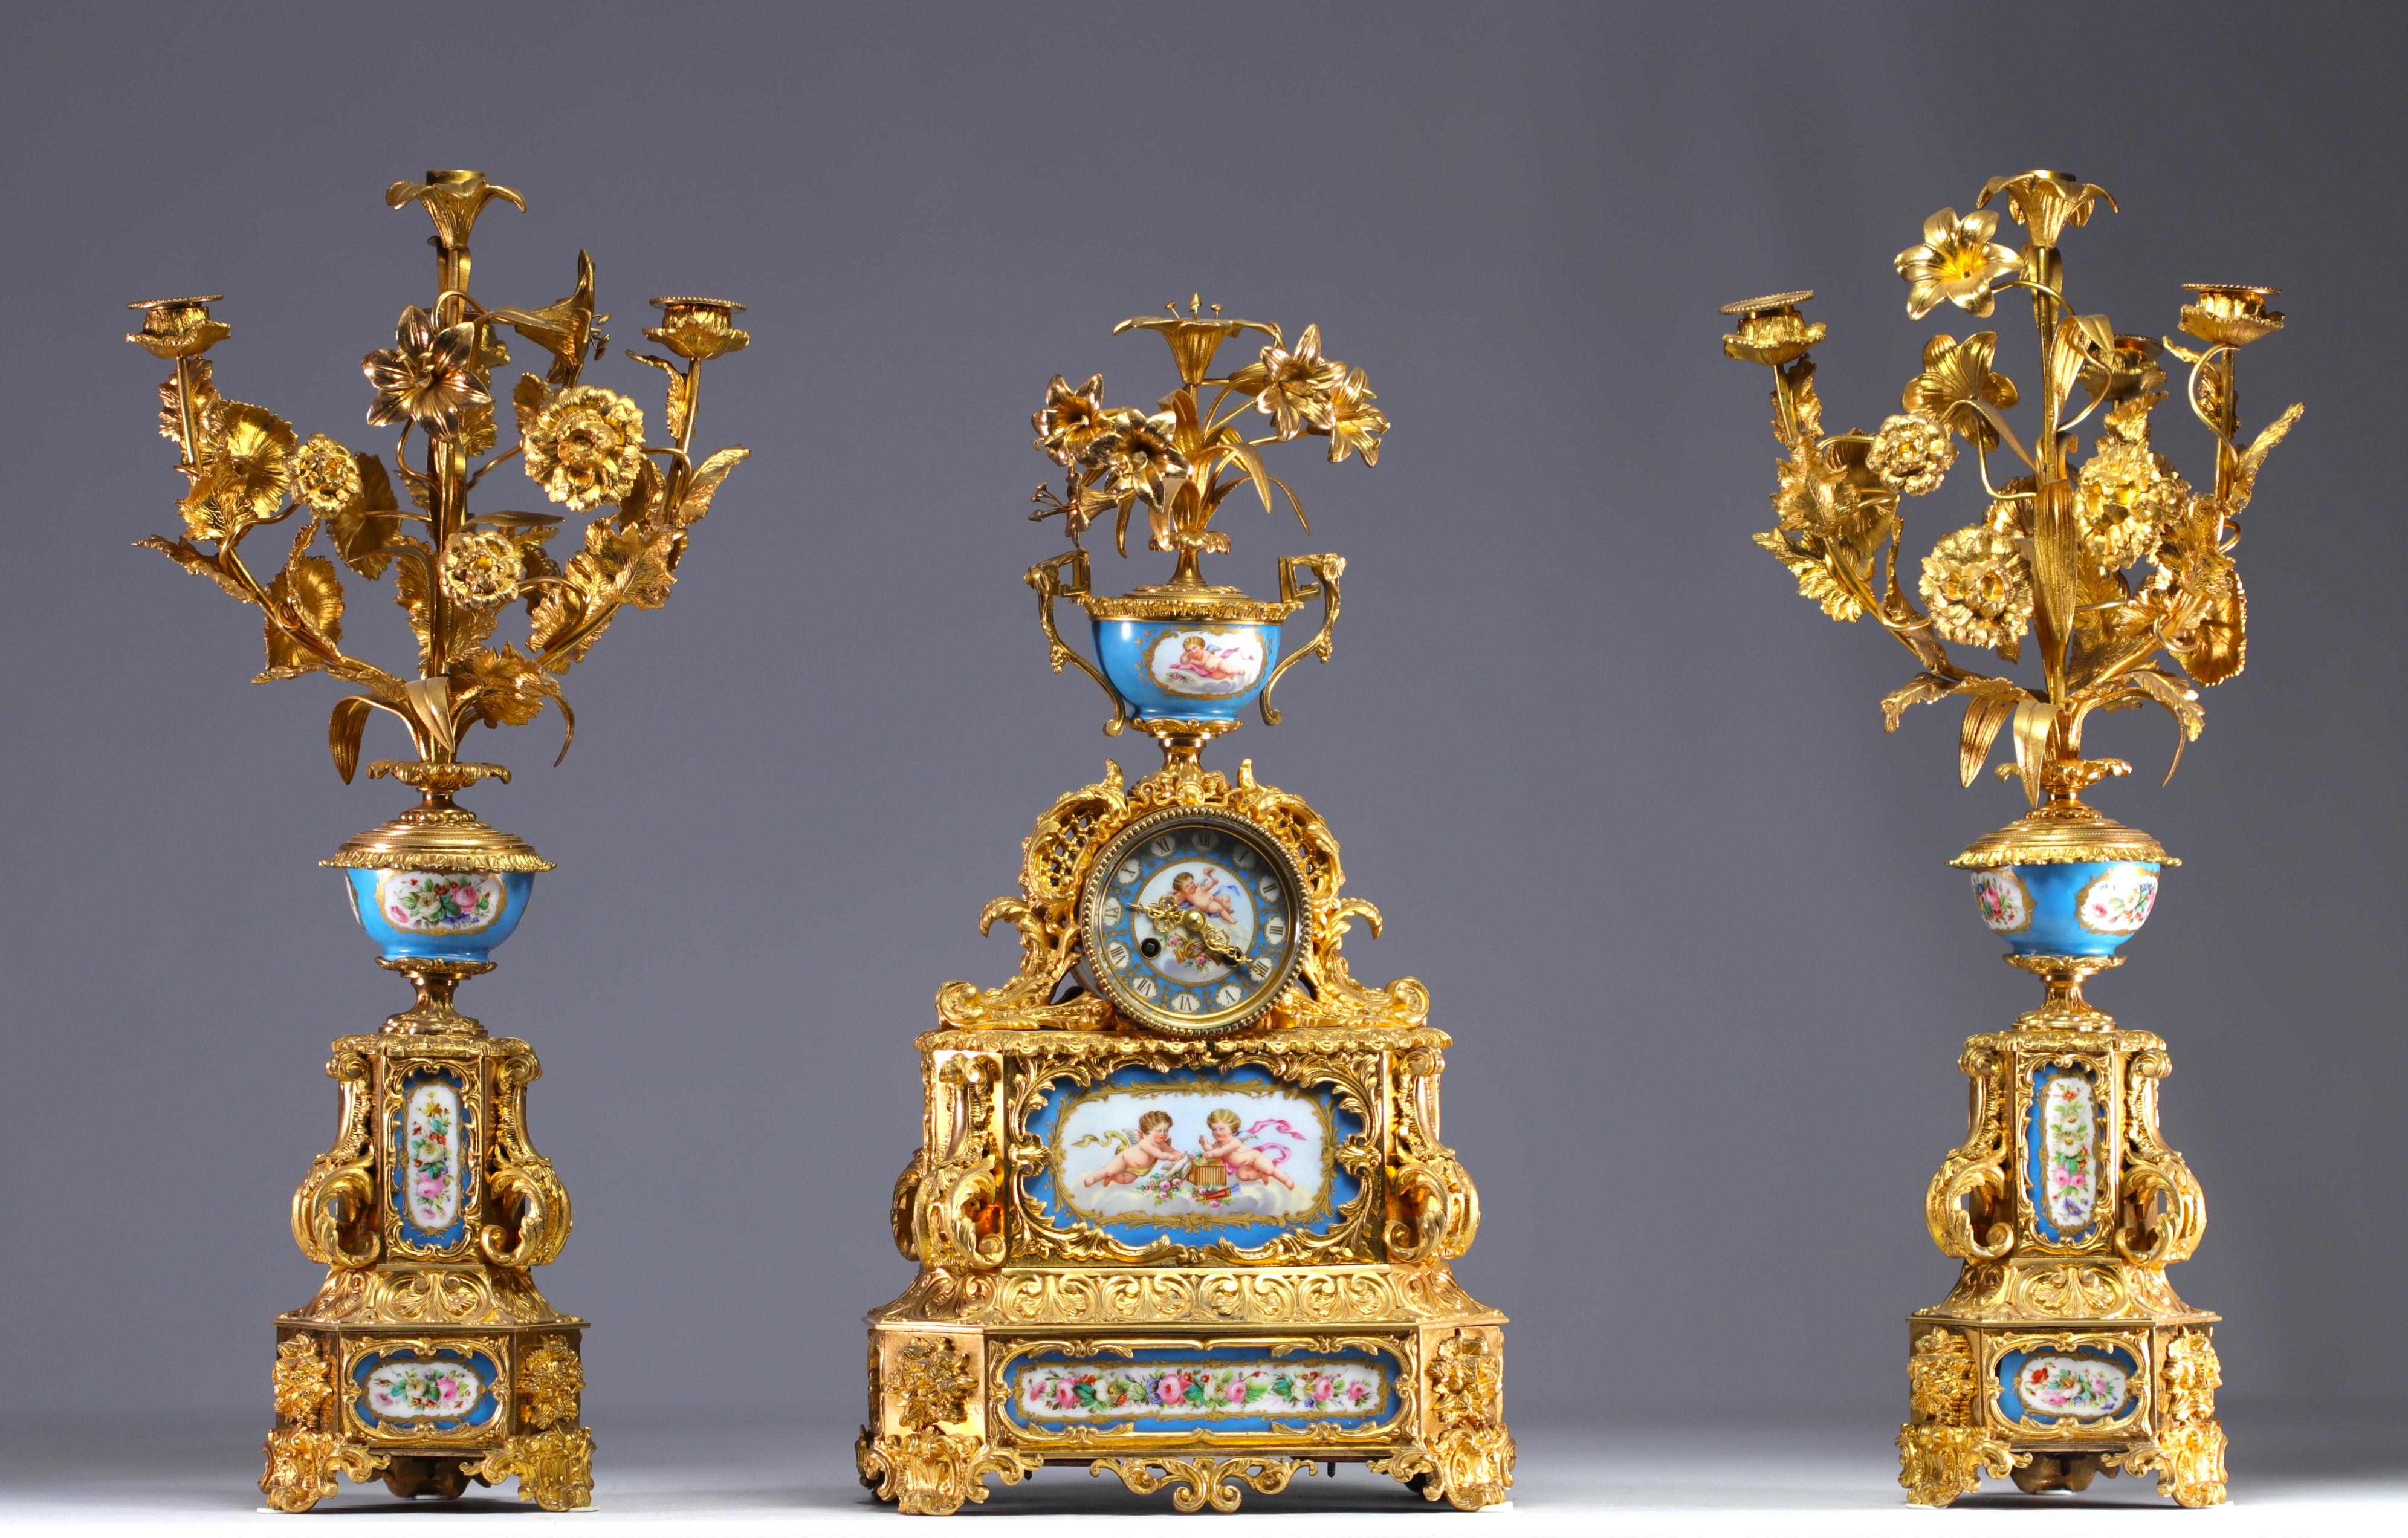 Imposing Sevres porcelain and gilded bronze mantelpiece.